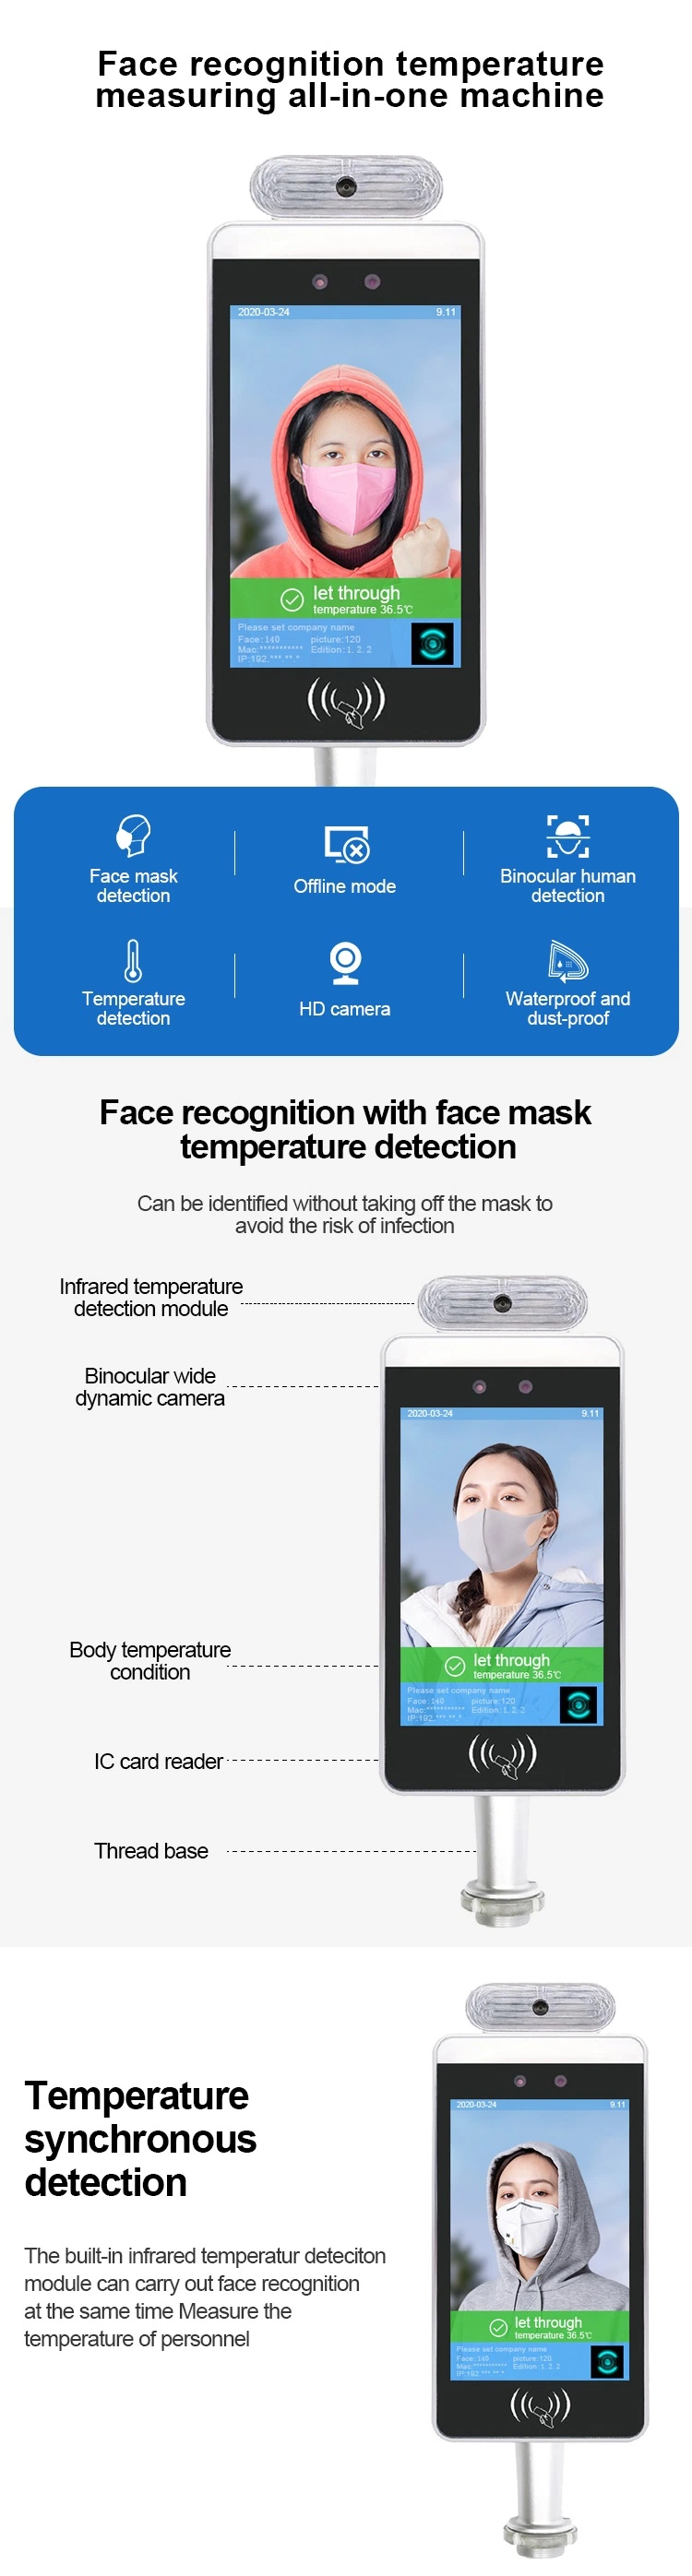 8 Inch Binocular Camera Human Body Temperature Measurement and Real Time Live Detection Face Recognition Terminal with Infrared Thermometer